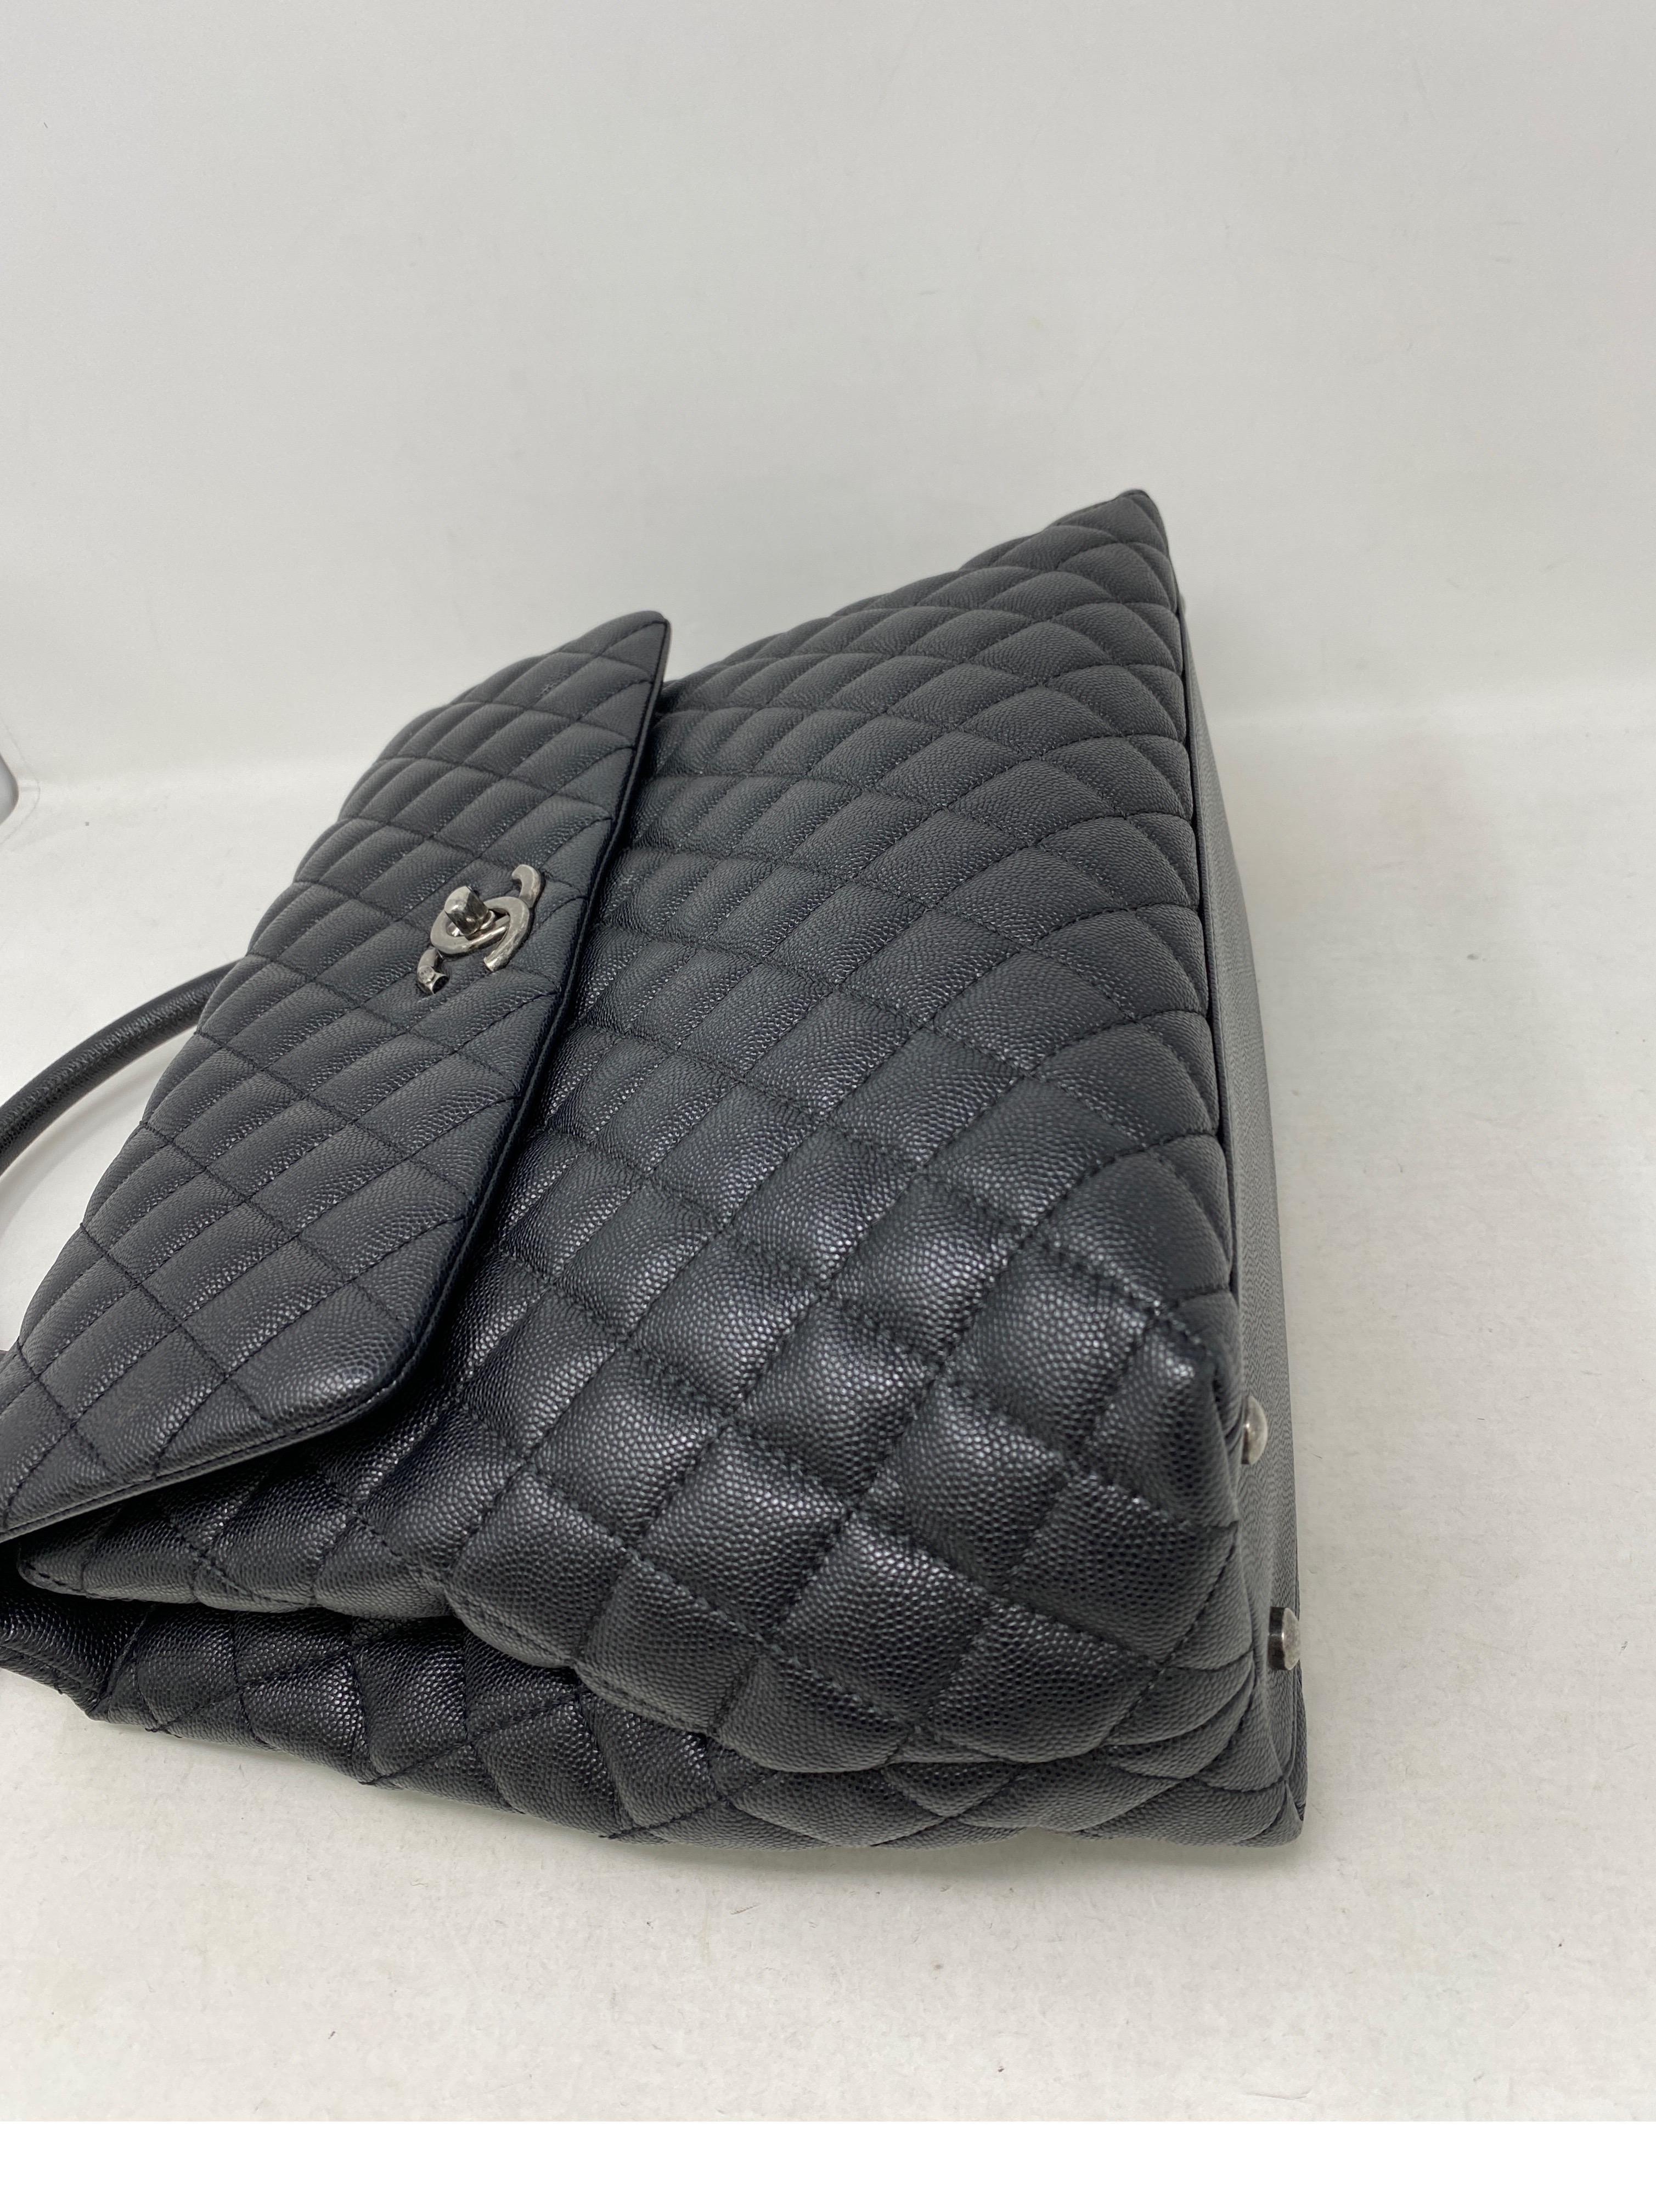 Women's or Men's Chanel Coco Handle Large Bag